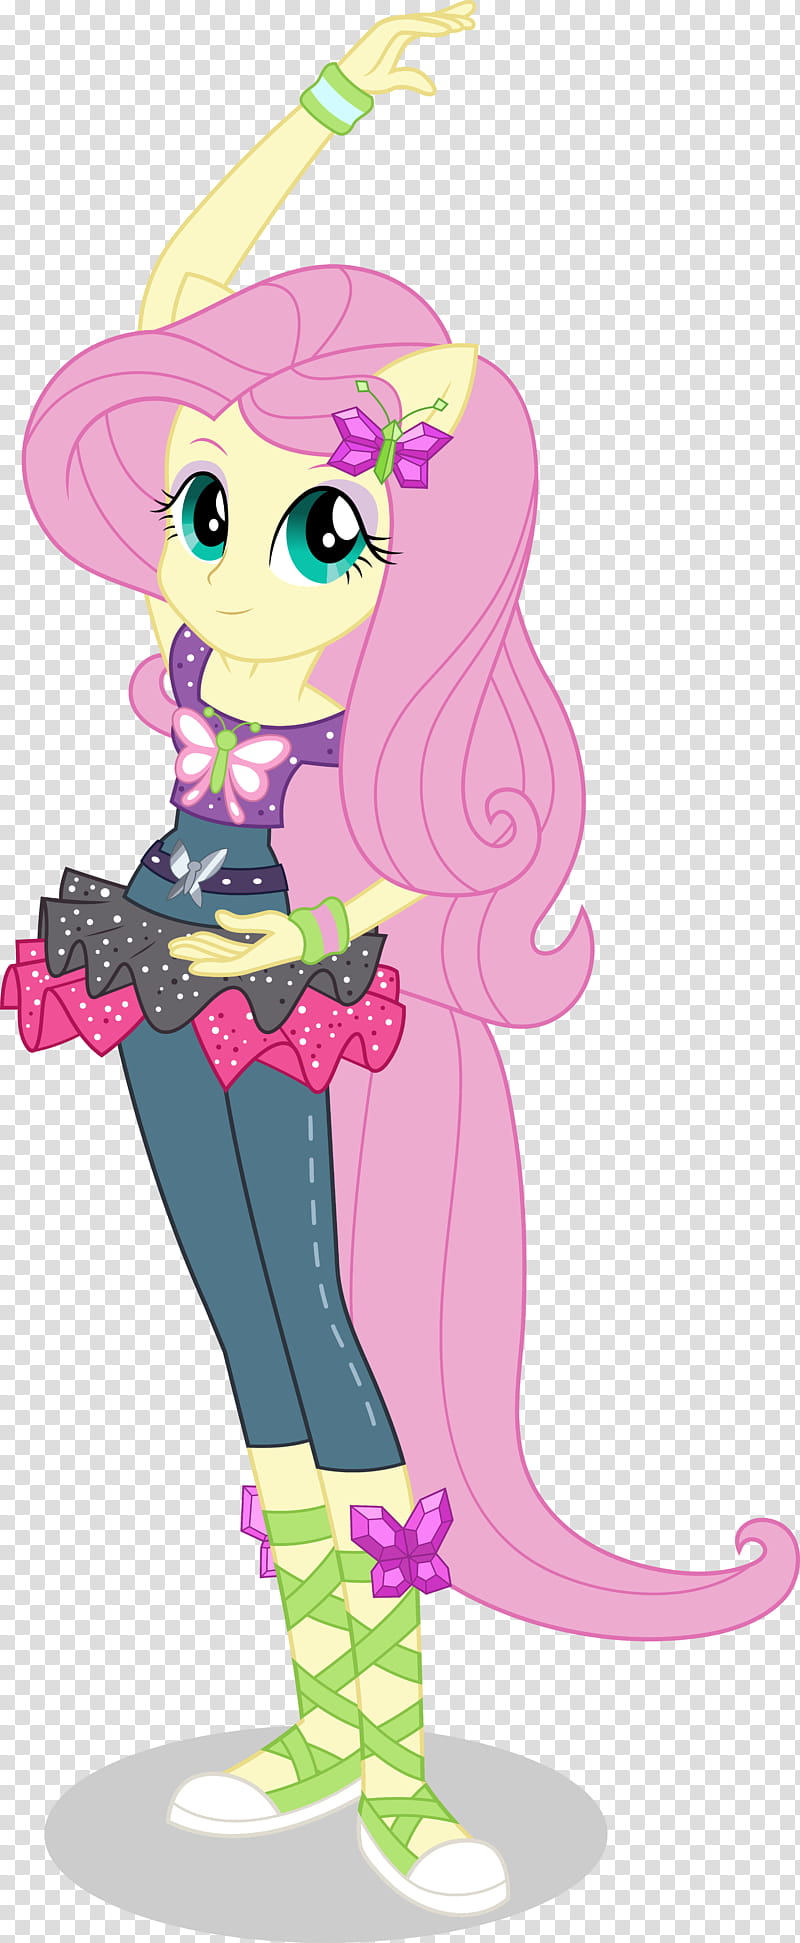 Dance Magic Fluttershy, My Little Pony pink-haired character transparent background PNG clipart